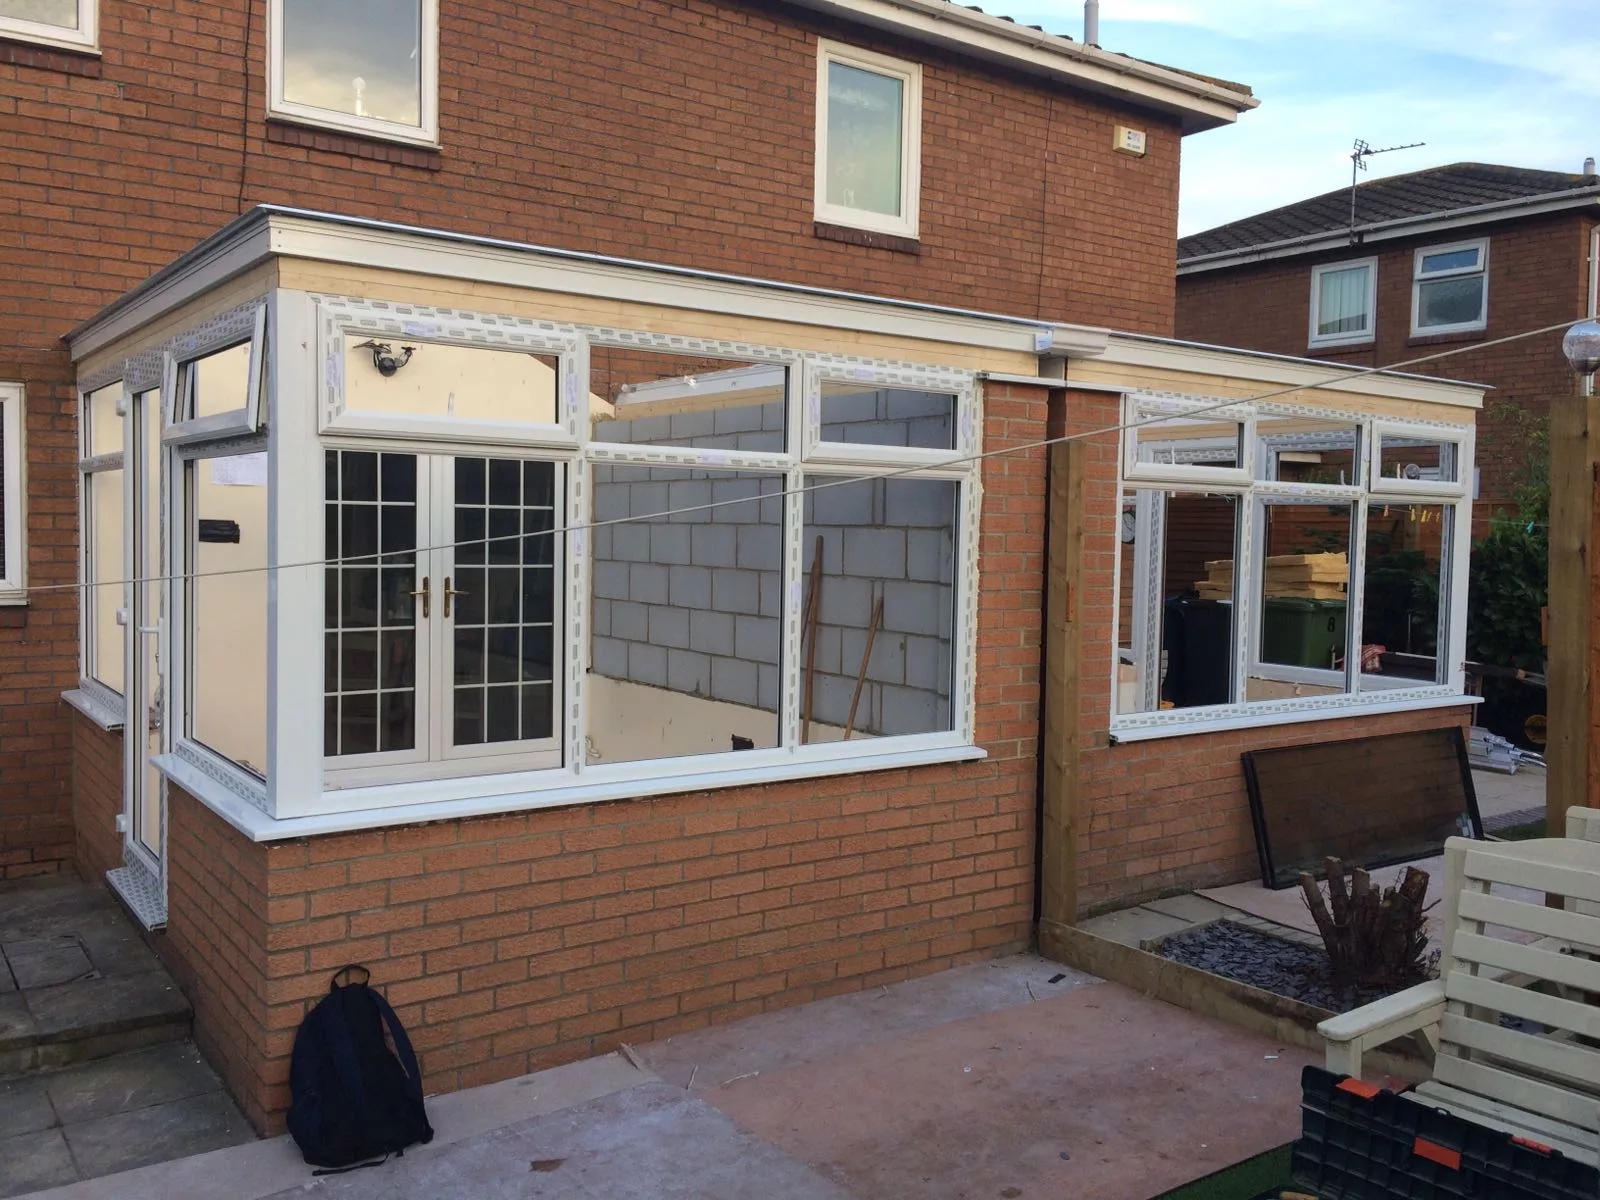 Replacing Polycarbonate Conservatory Roof to Tiled Conservatory Roof - Edwardian